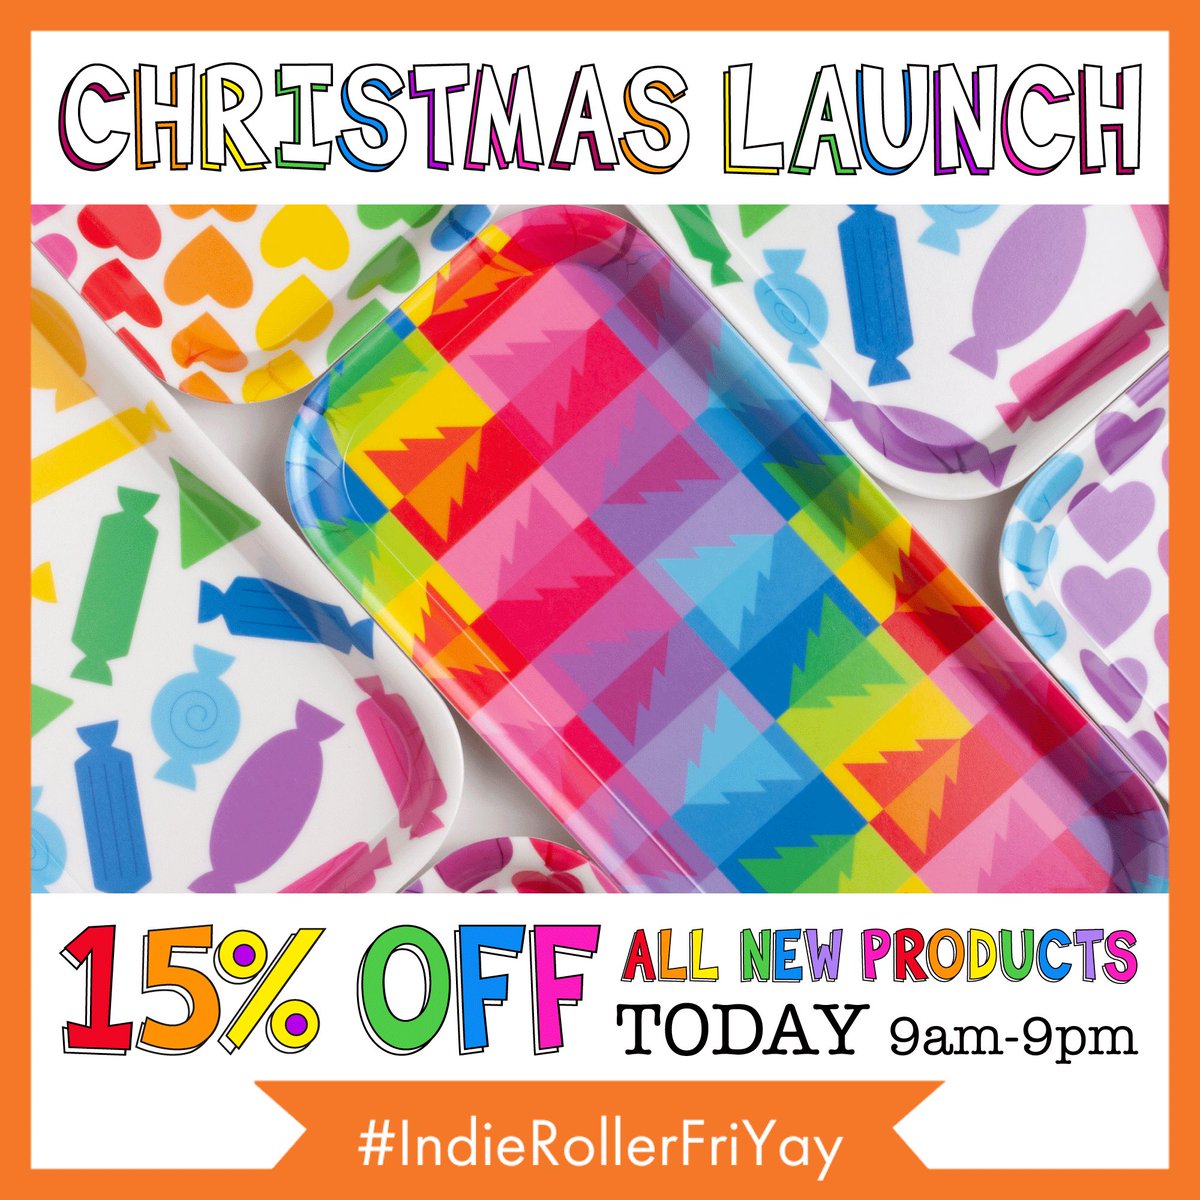 My Christmas launch is here!! 
🎉🎉🎉🎉🎉🎉🎉🎉🎉
With 15% off all my new products!

etsy.com/uk/shop/Colour…

#christmasiscoming #christmaslaunch #christmascountdown #christmasgifts #indierollerfriyay #shopsmallseptember #shopsmall #christmasgiftideas #earlybirdoffer